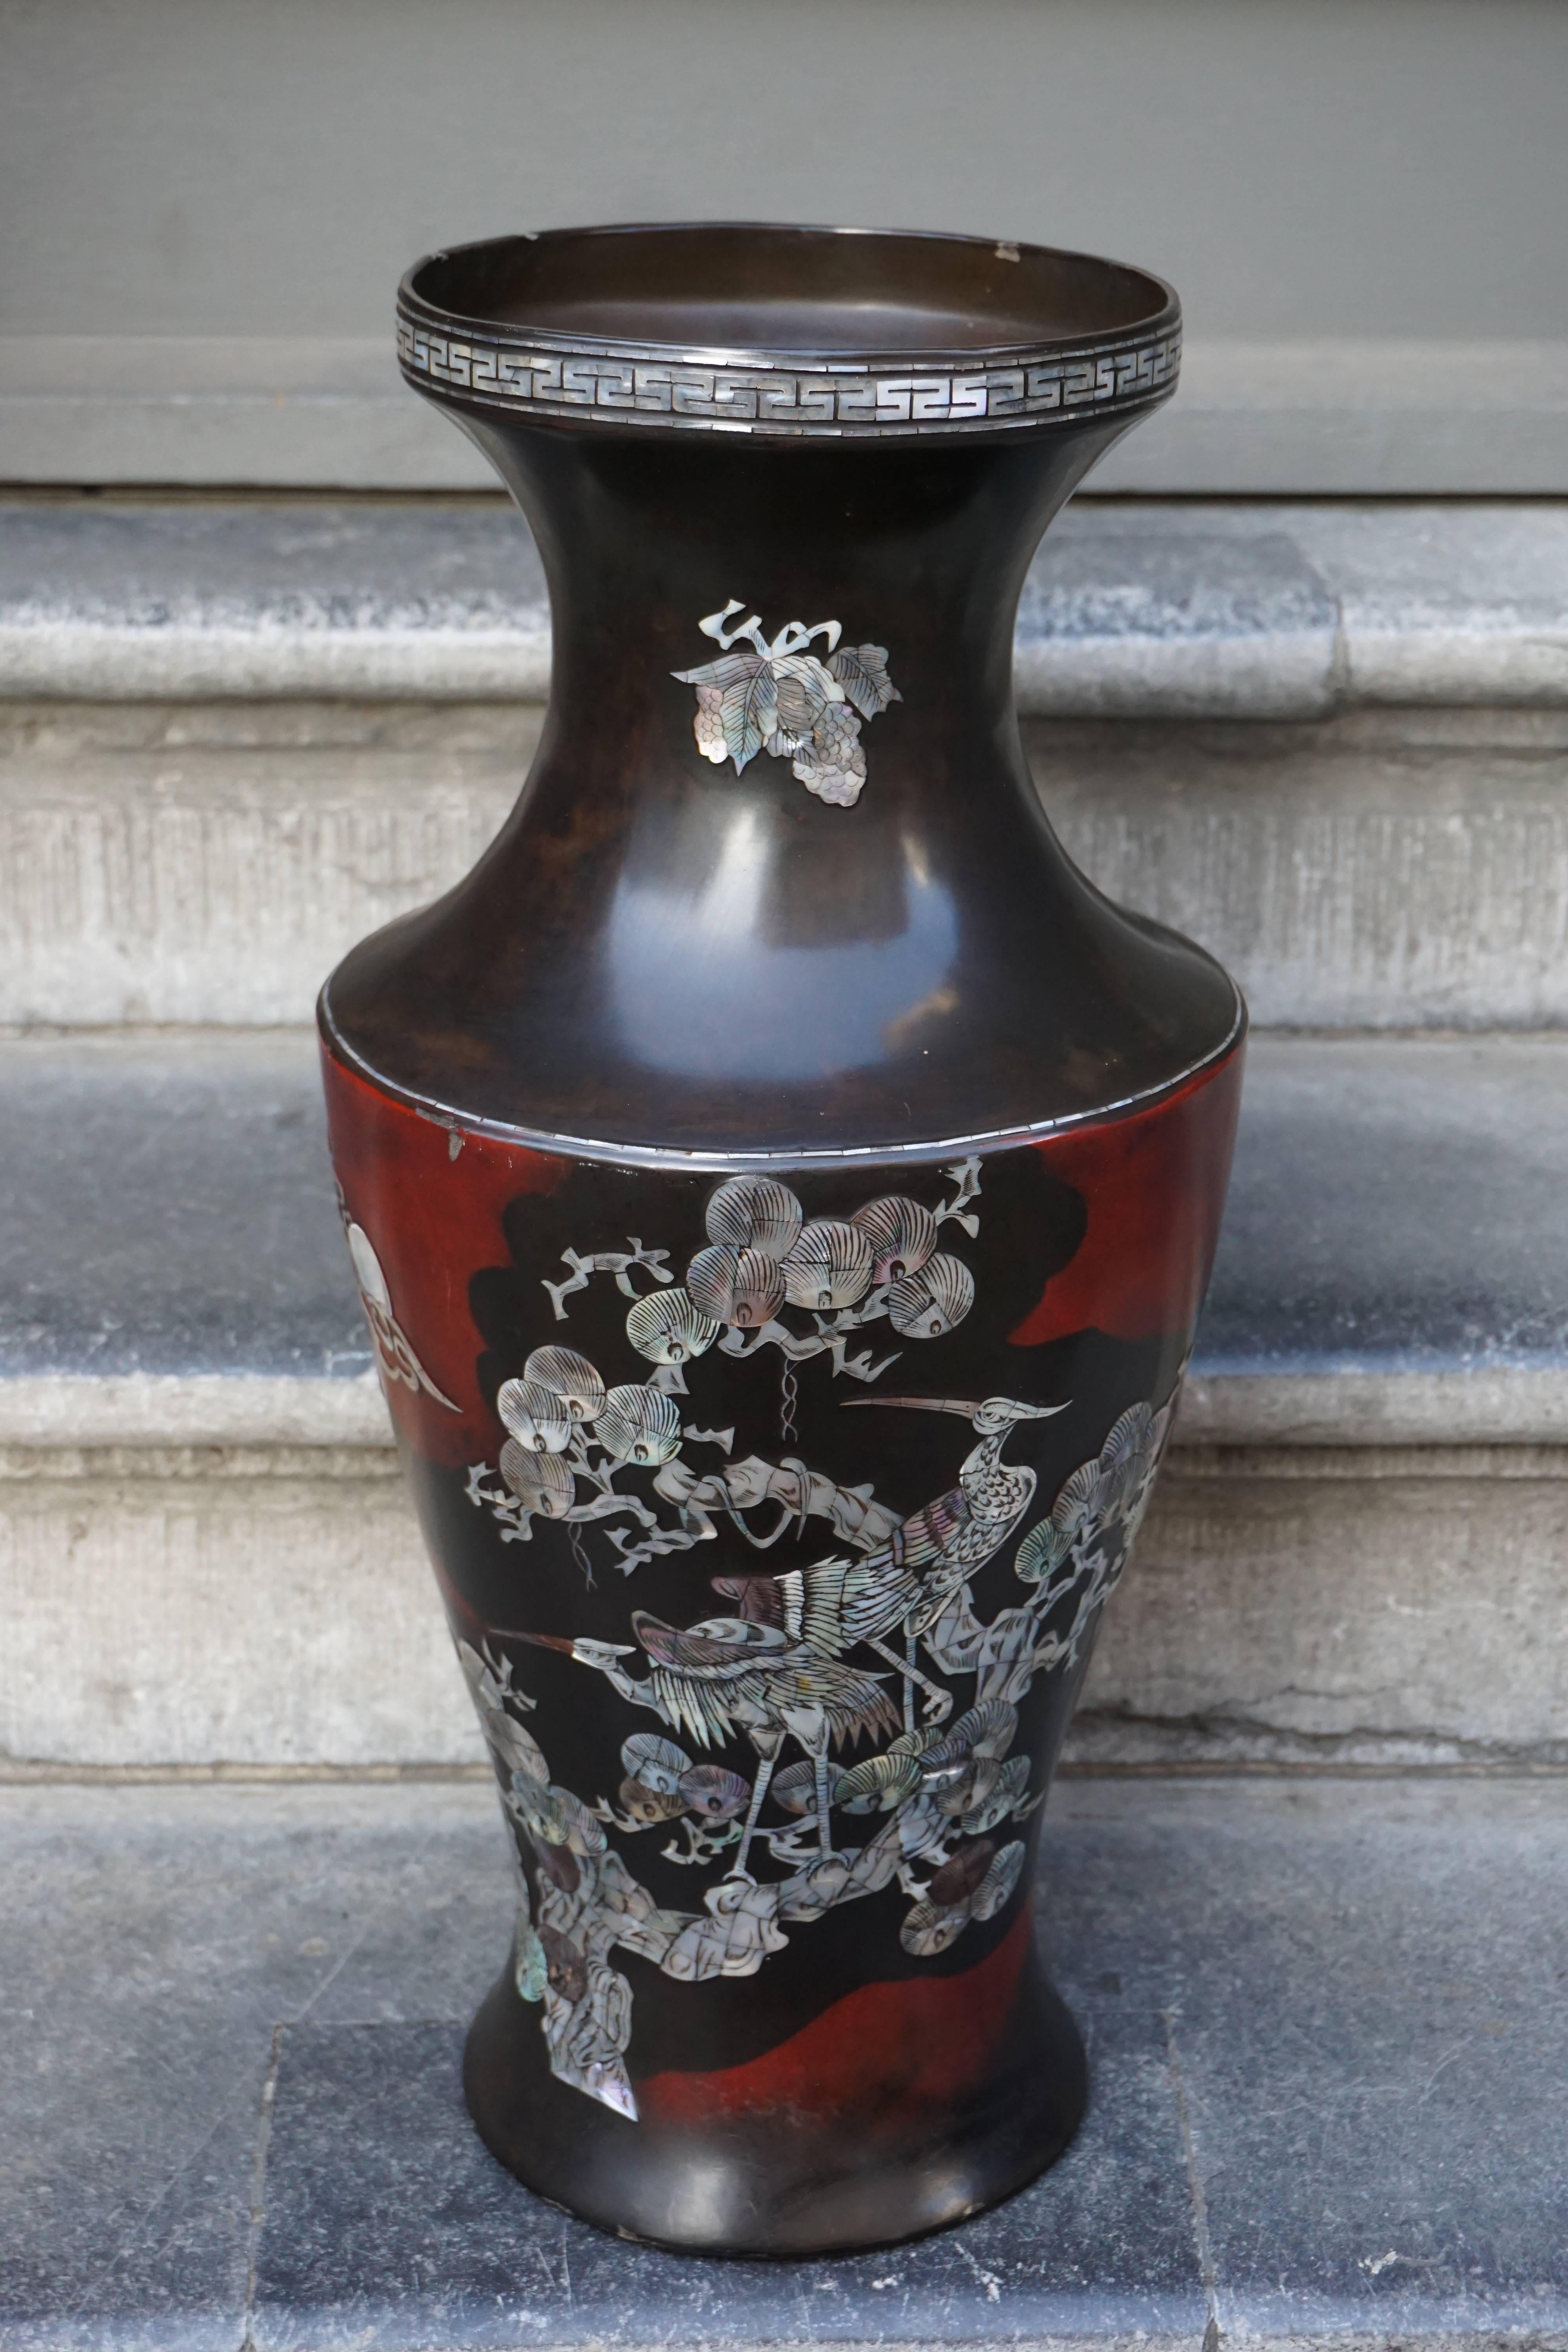 Japanese vase inlaid with mother-of-pearl.
Measures: Diameter 24 cm.
Height 50 cm.